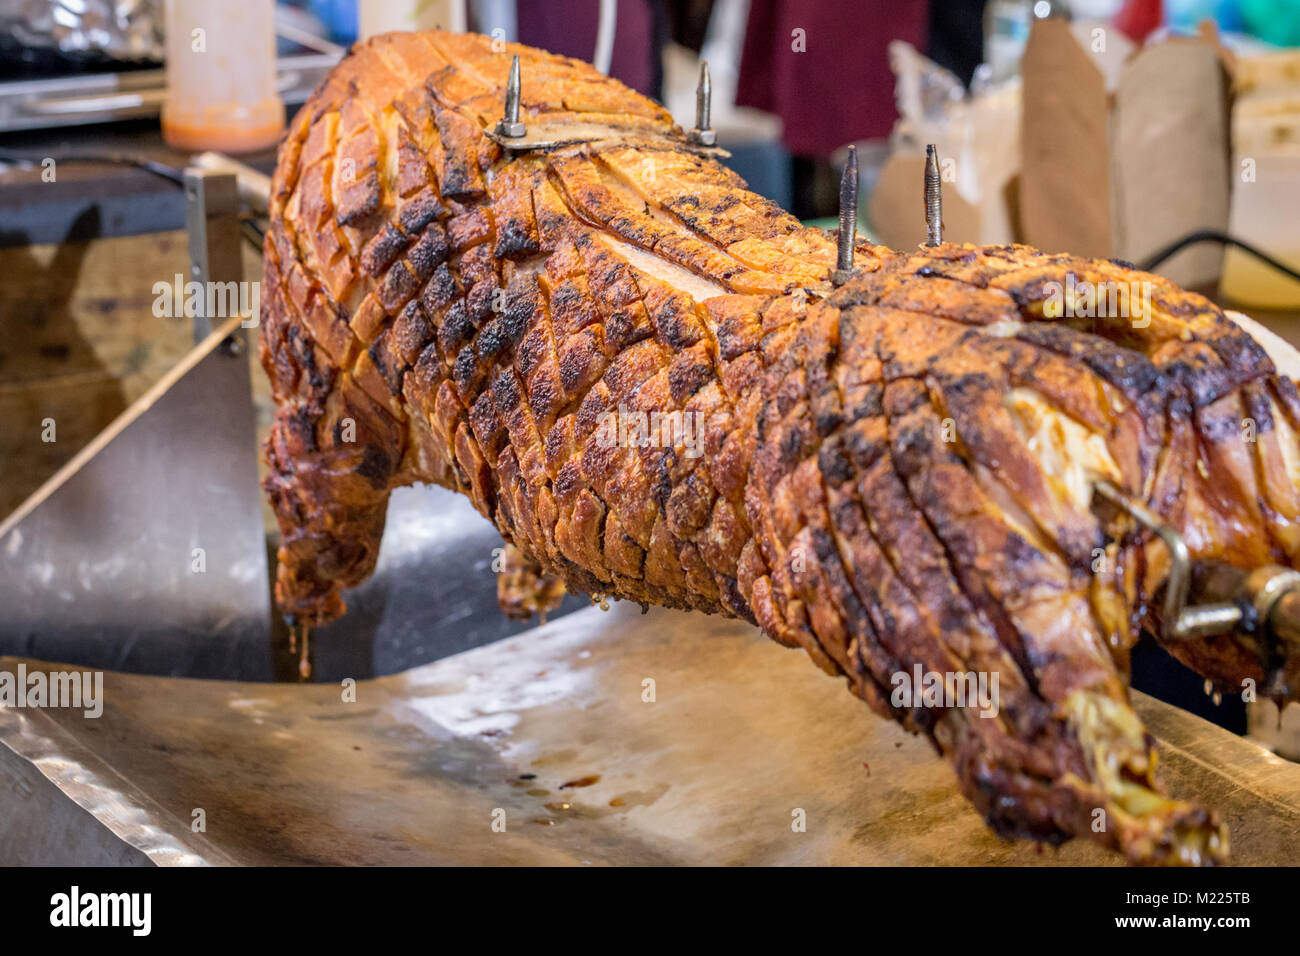 A spit roasted pig on a market stall in Borough Market, London Stock Photo